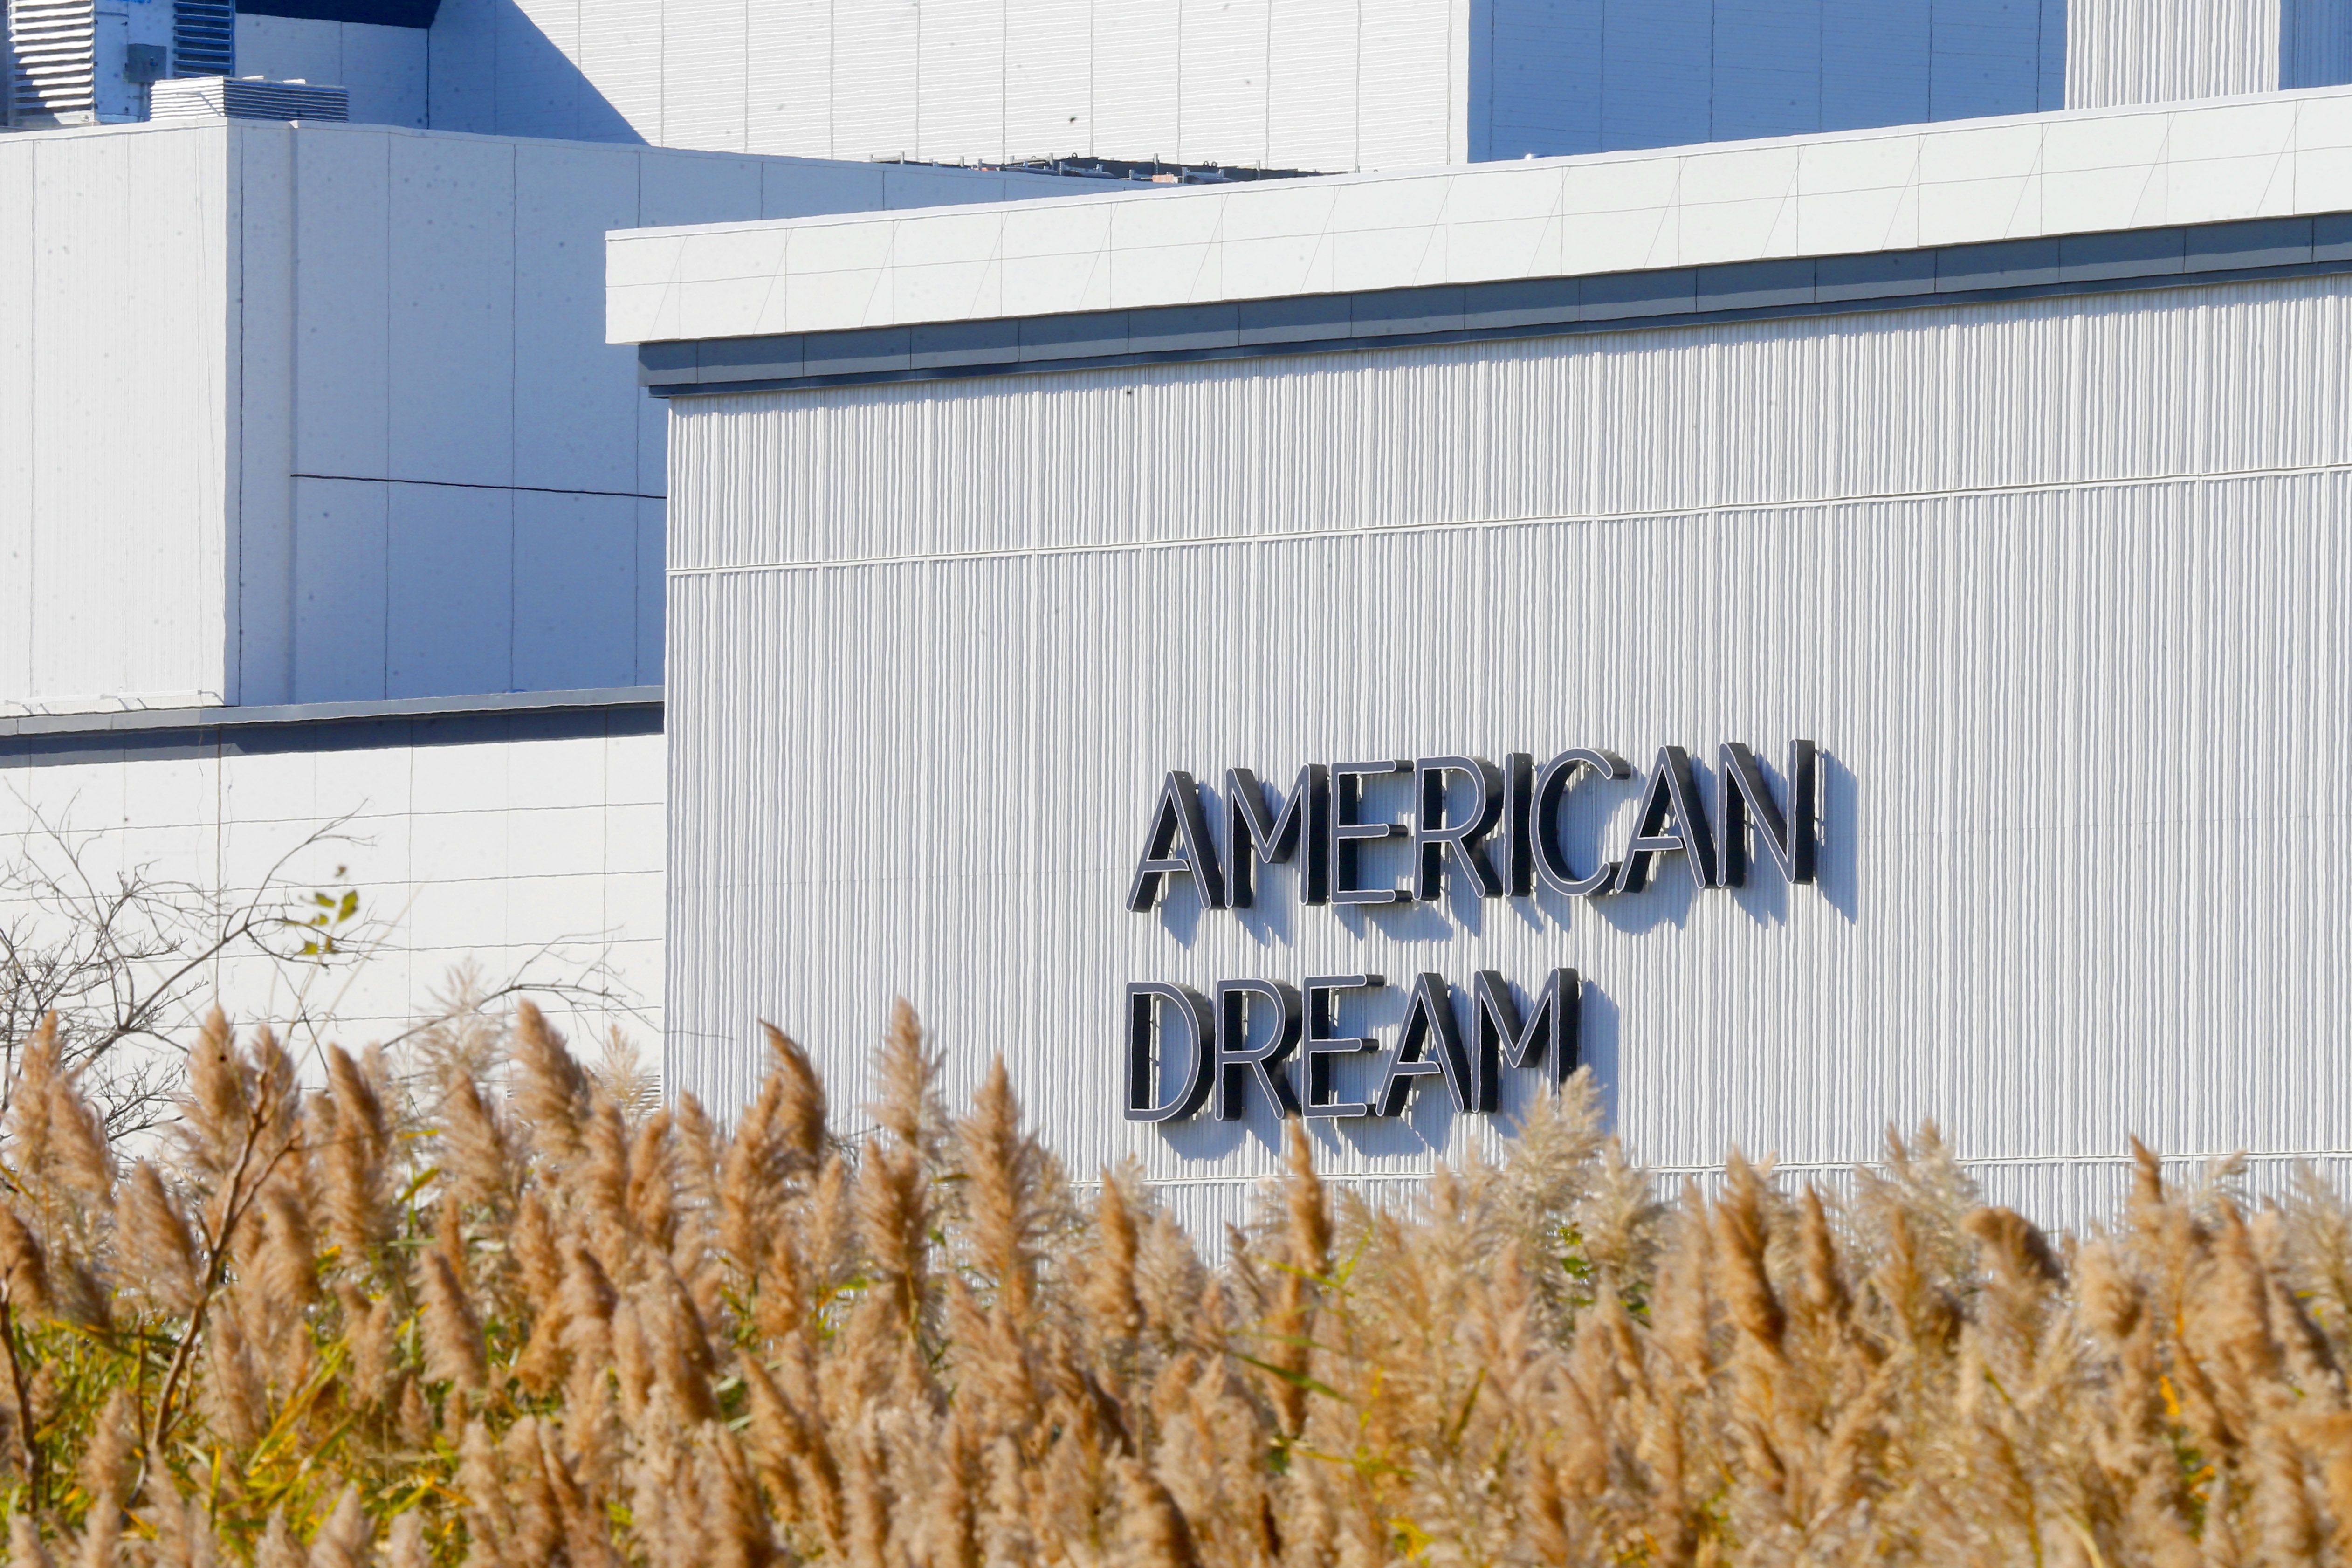 American Dream Mall: Here's a list of stores opening in 2020 